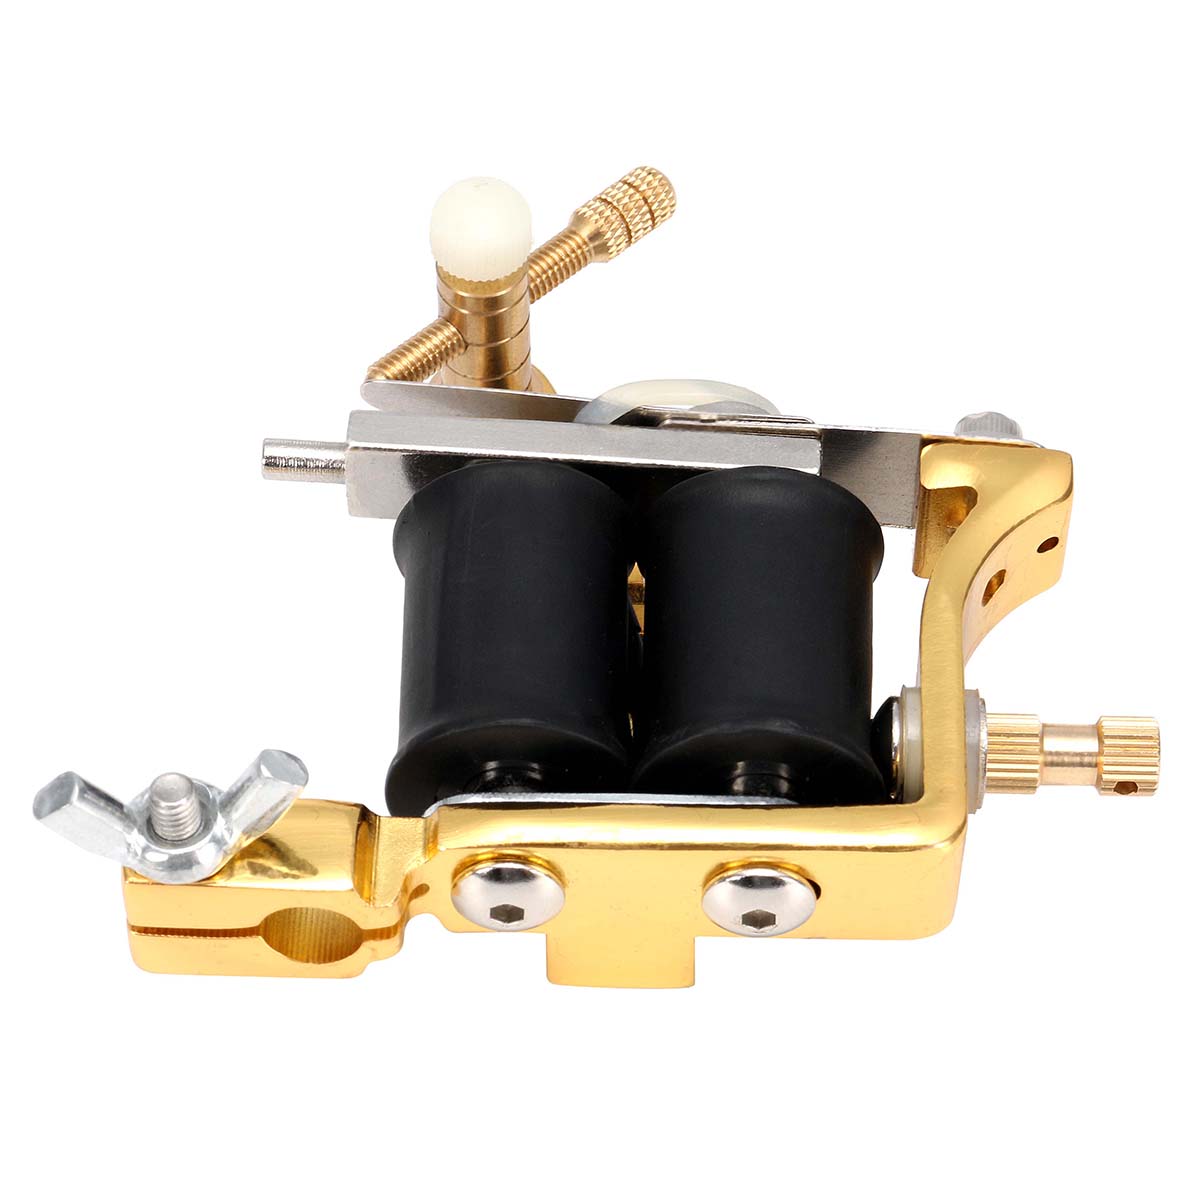 CNC-Carved-Brass-Alloy-Tattoo-Machine-Part-Frame-For-Shader-Liner-for-32mm-Coils-1732342-4